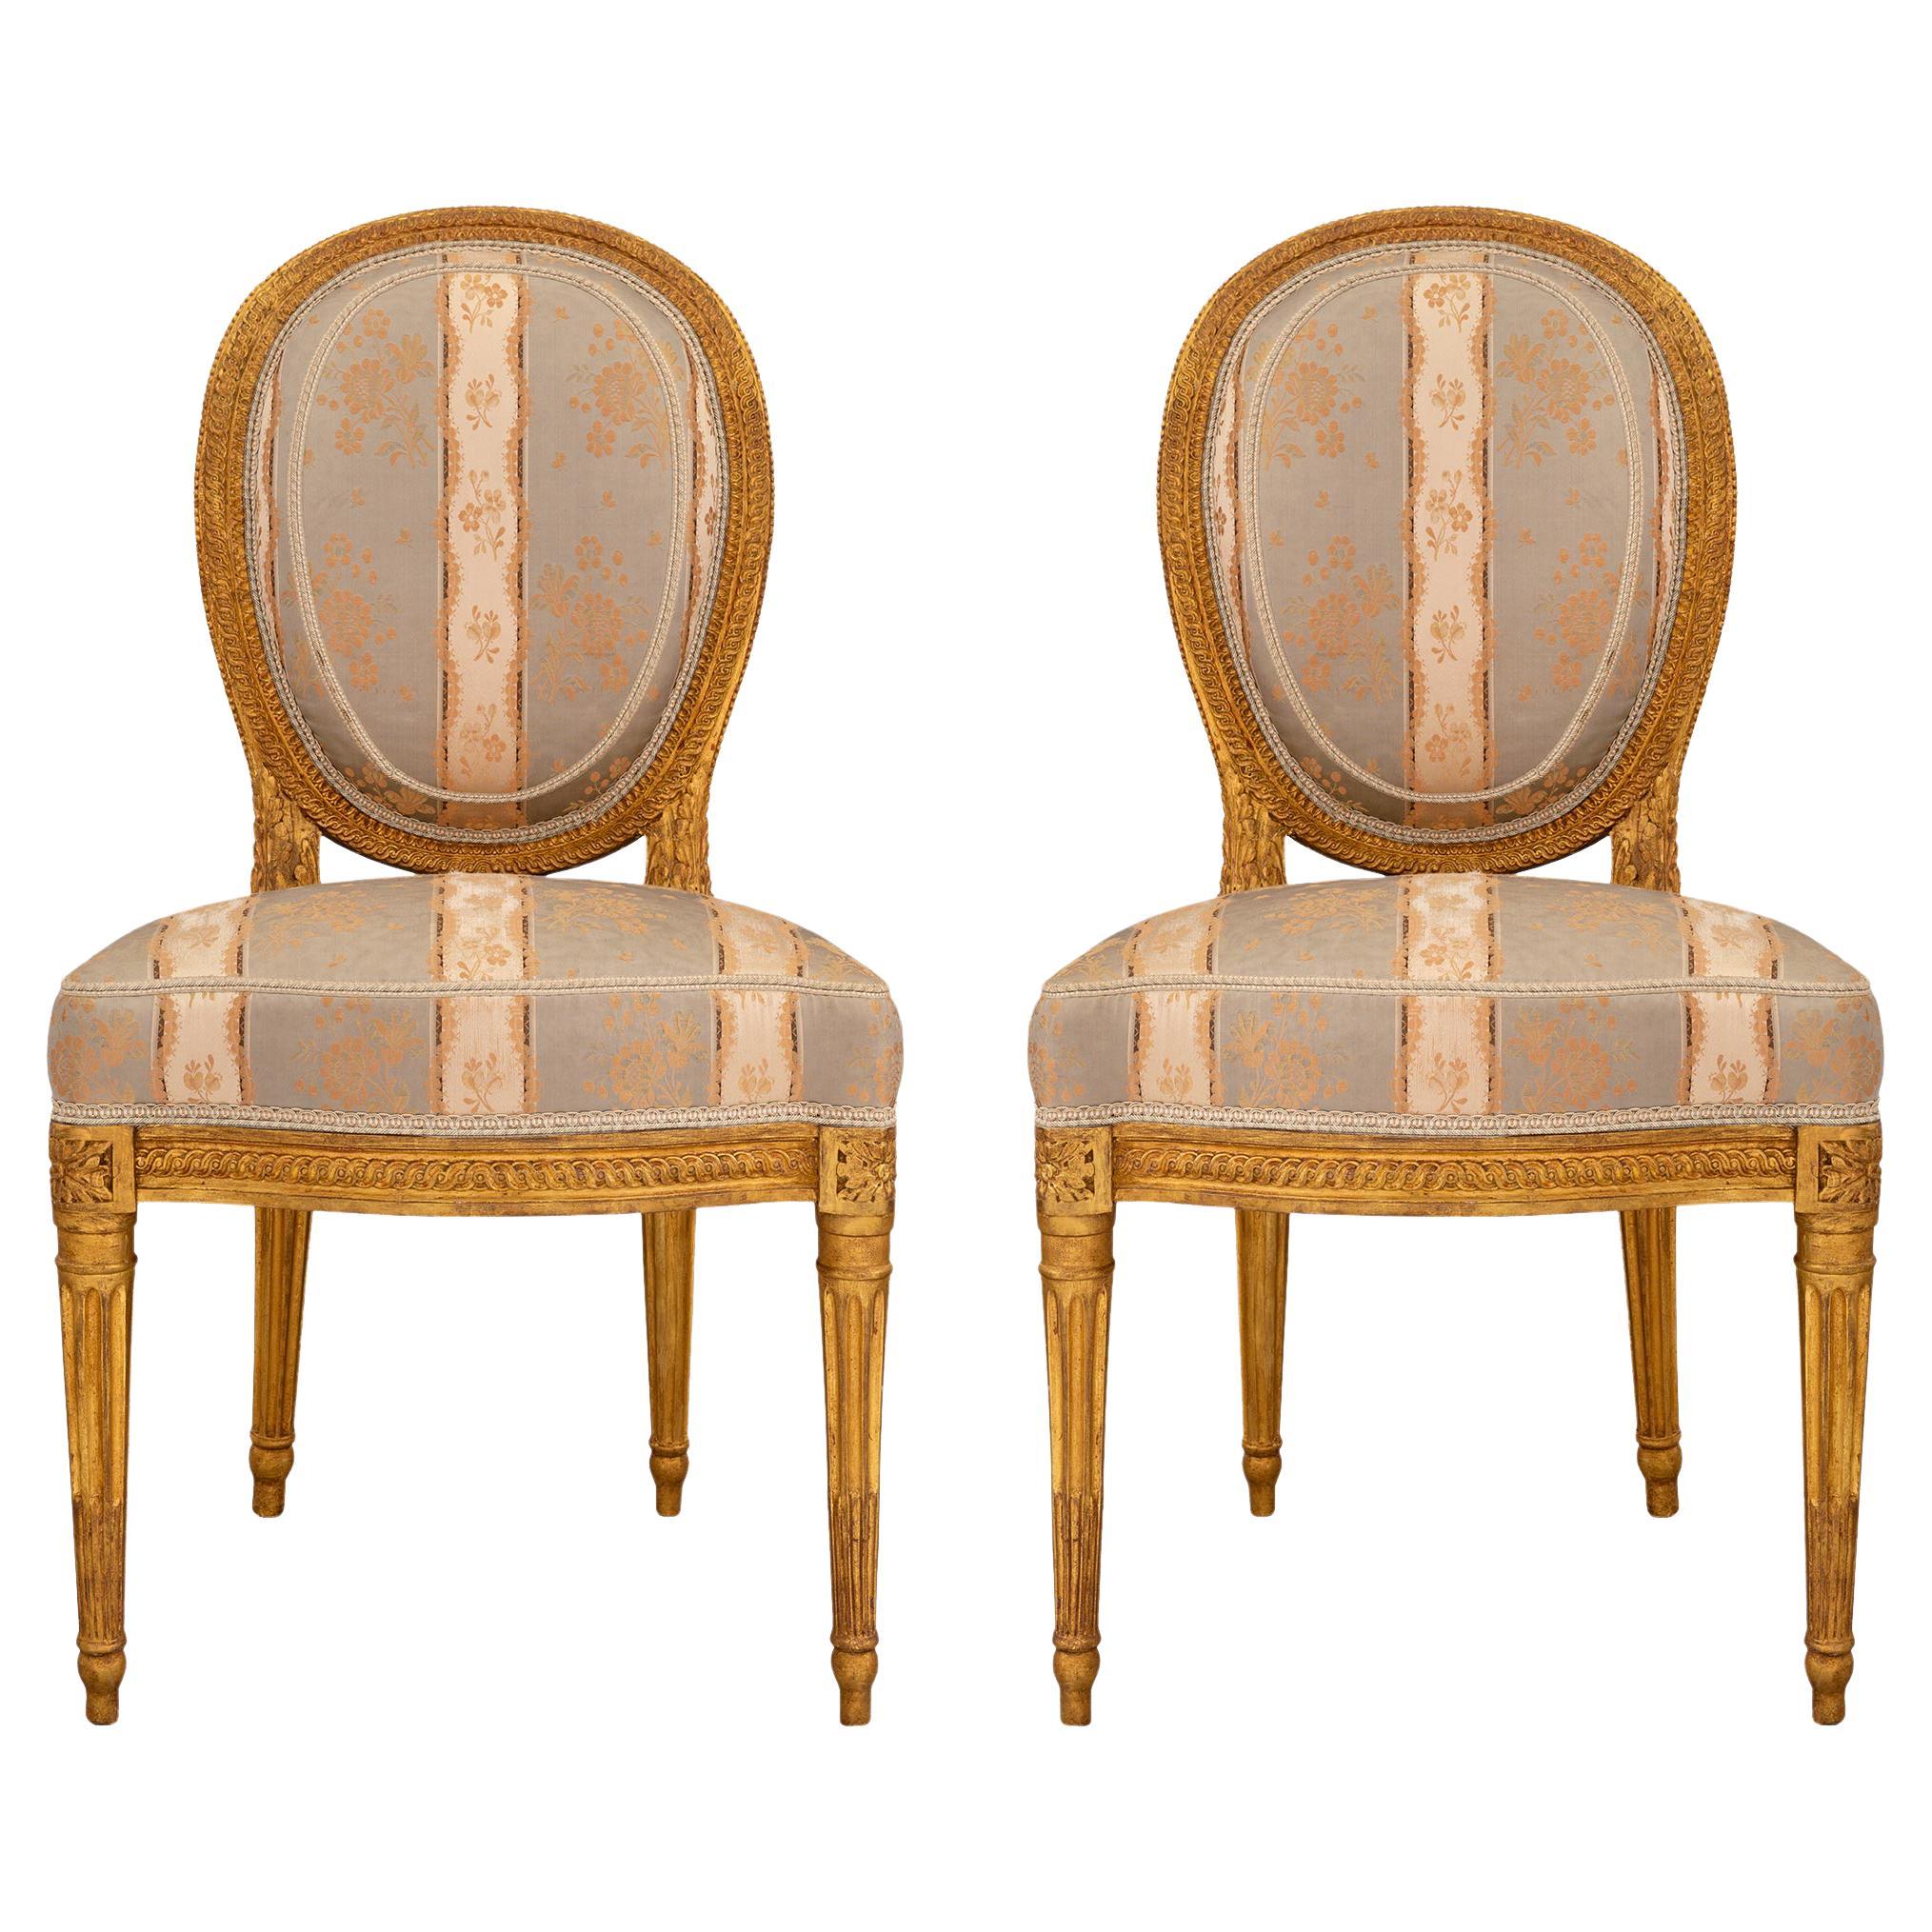 Pair of French 18th Louis XVI Period Giltwood Side Chairs